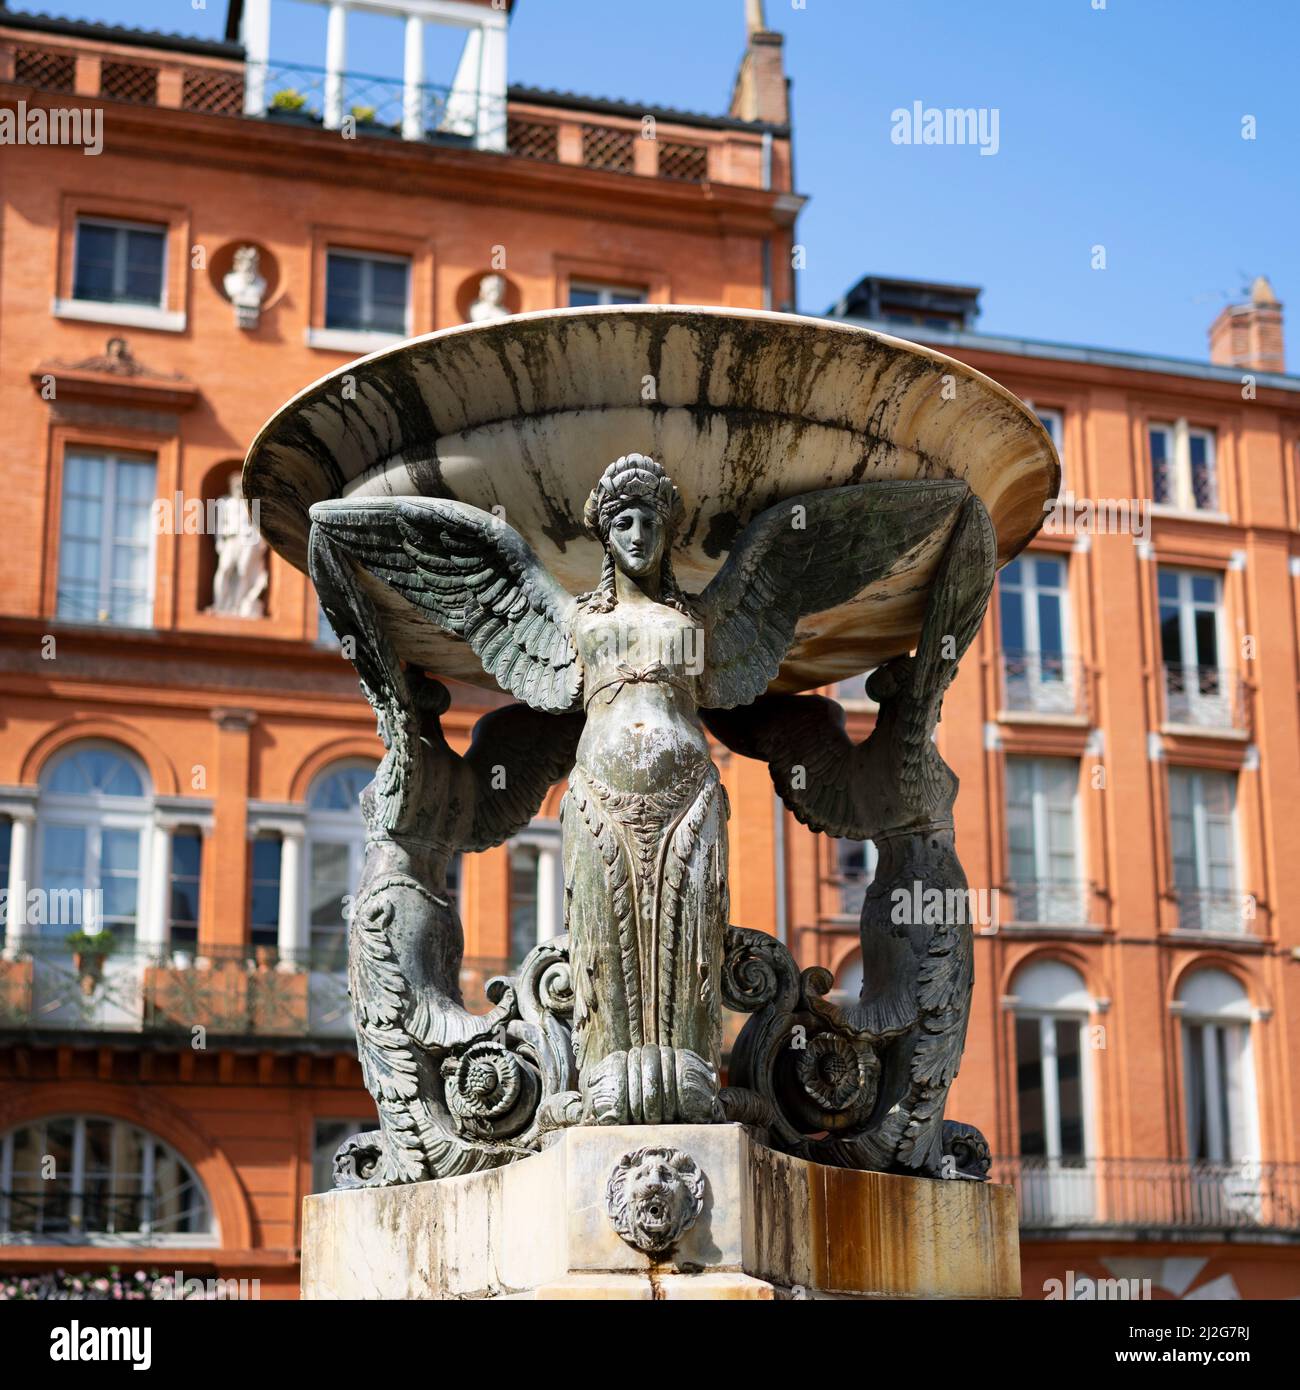 The beautiful Statue, Trinity fountain in the historical district of Toulouse, with red brick building in background, France. Stock Photo